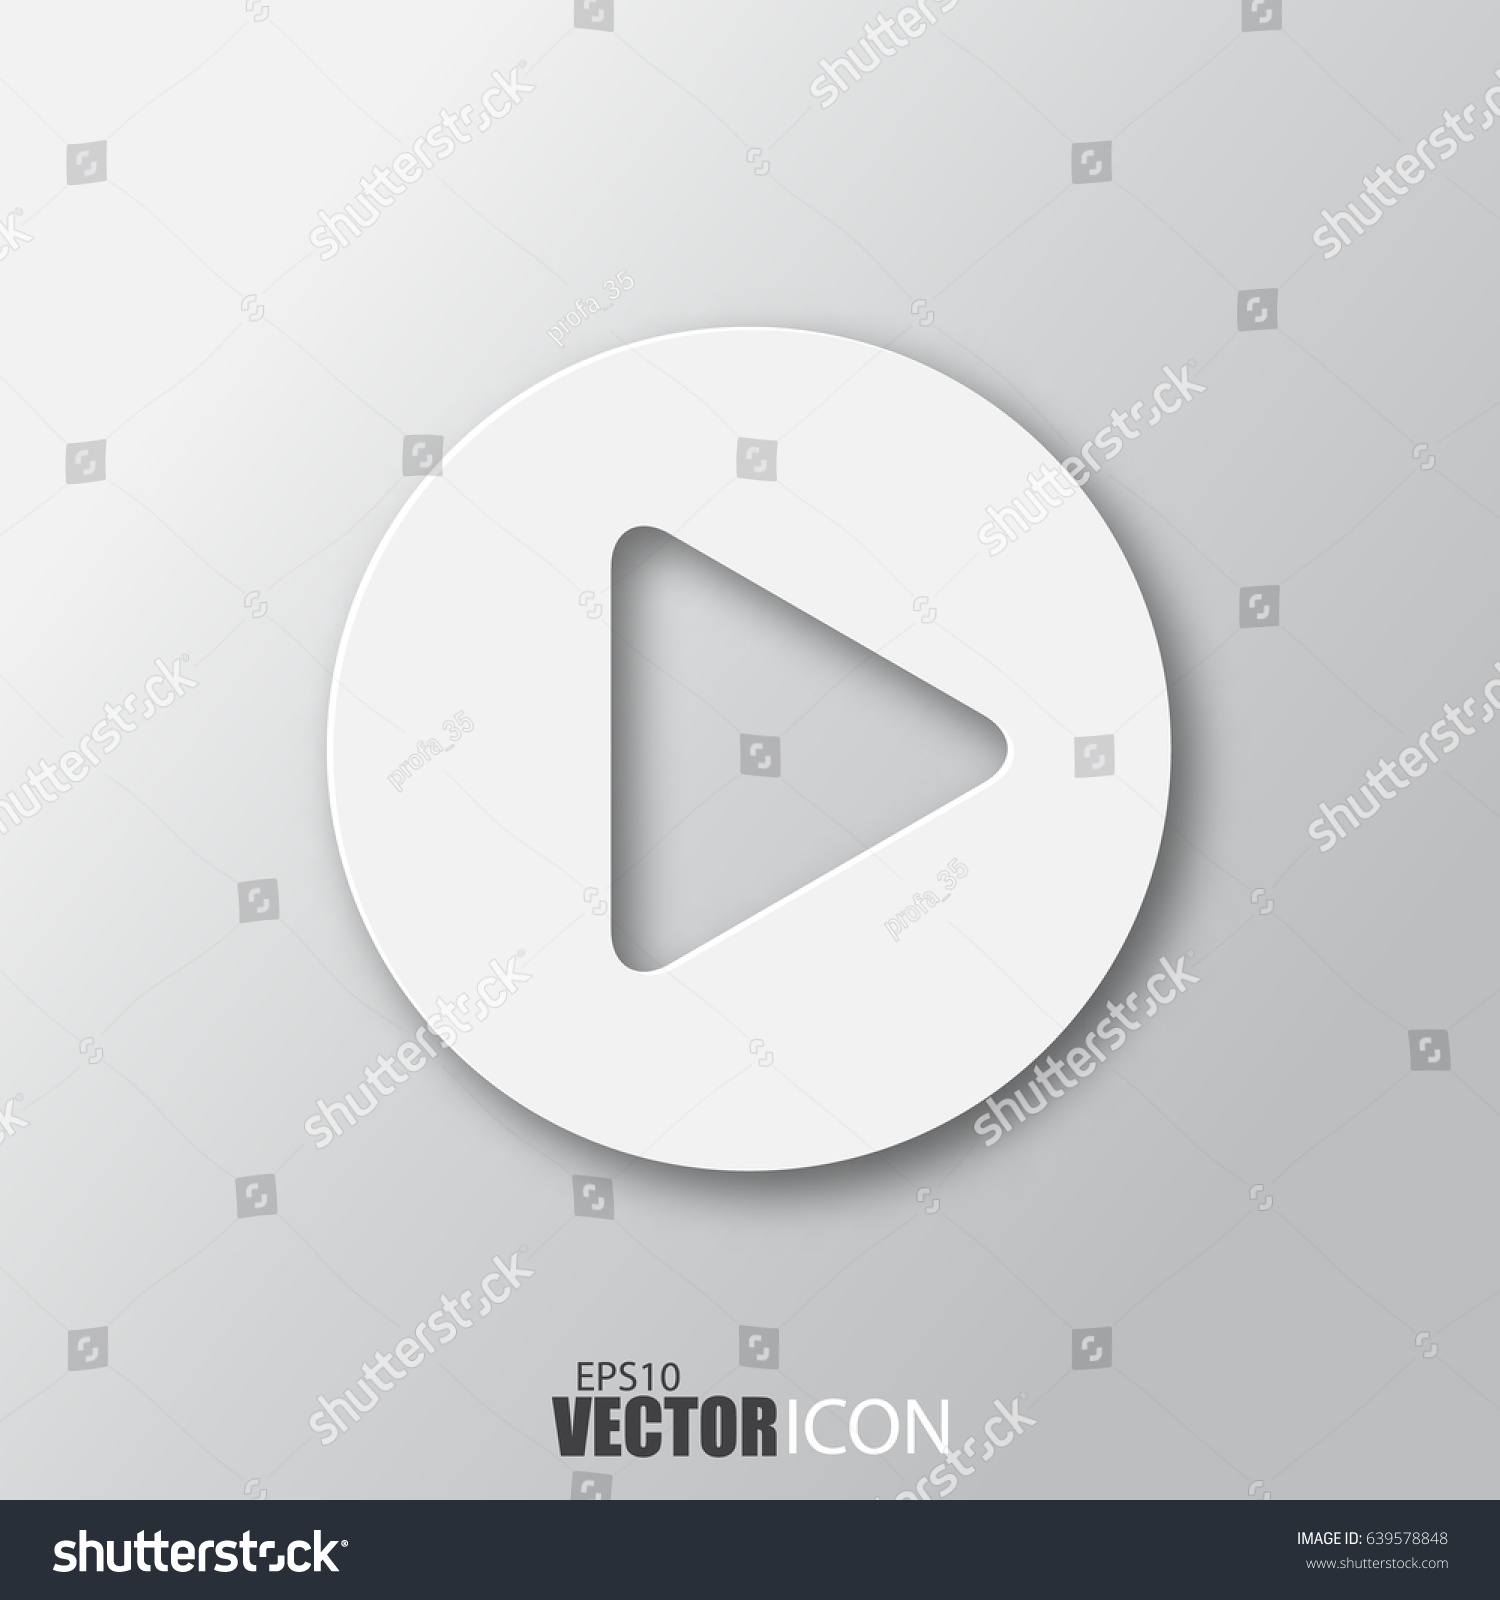 Play icon in white style with shadow isolated on grey background. For your design, logo. Vector illustration. #639578848